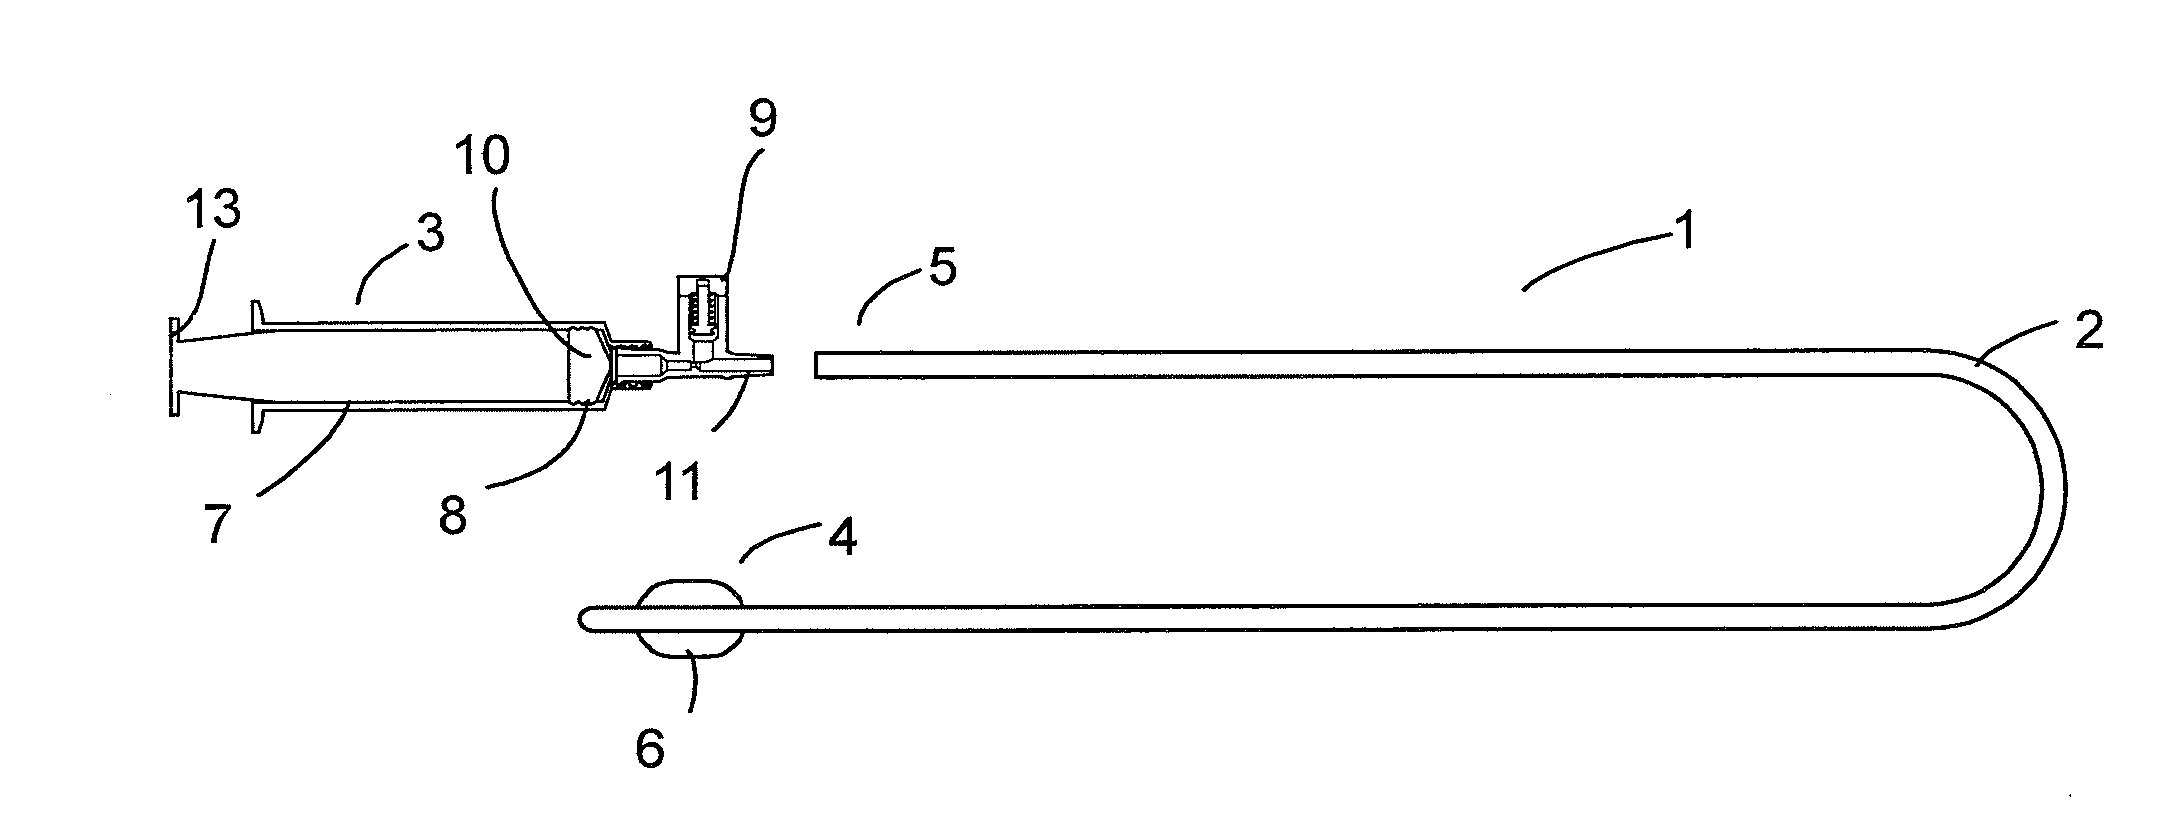 Transurethral catheter kit, and syringe assembly suitable for use in correctly inflating a transurethral catheter